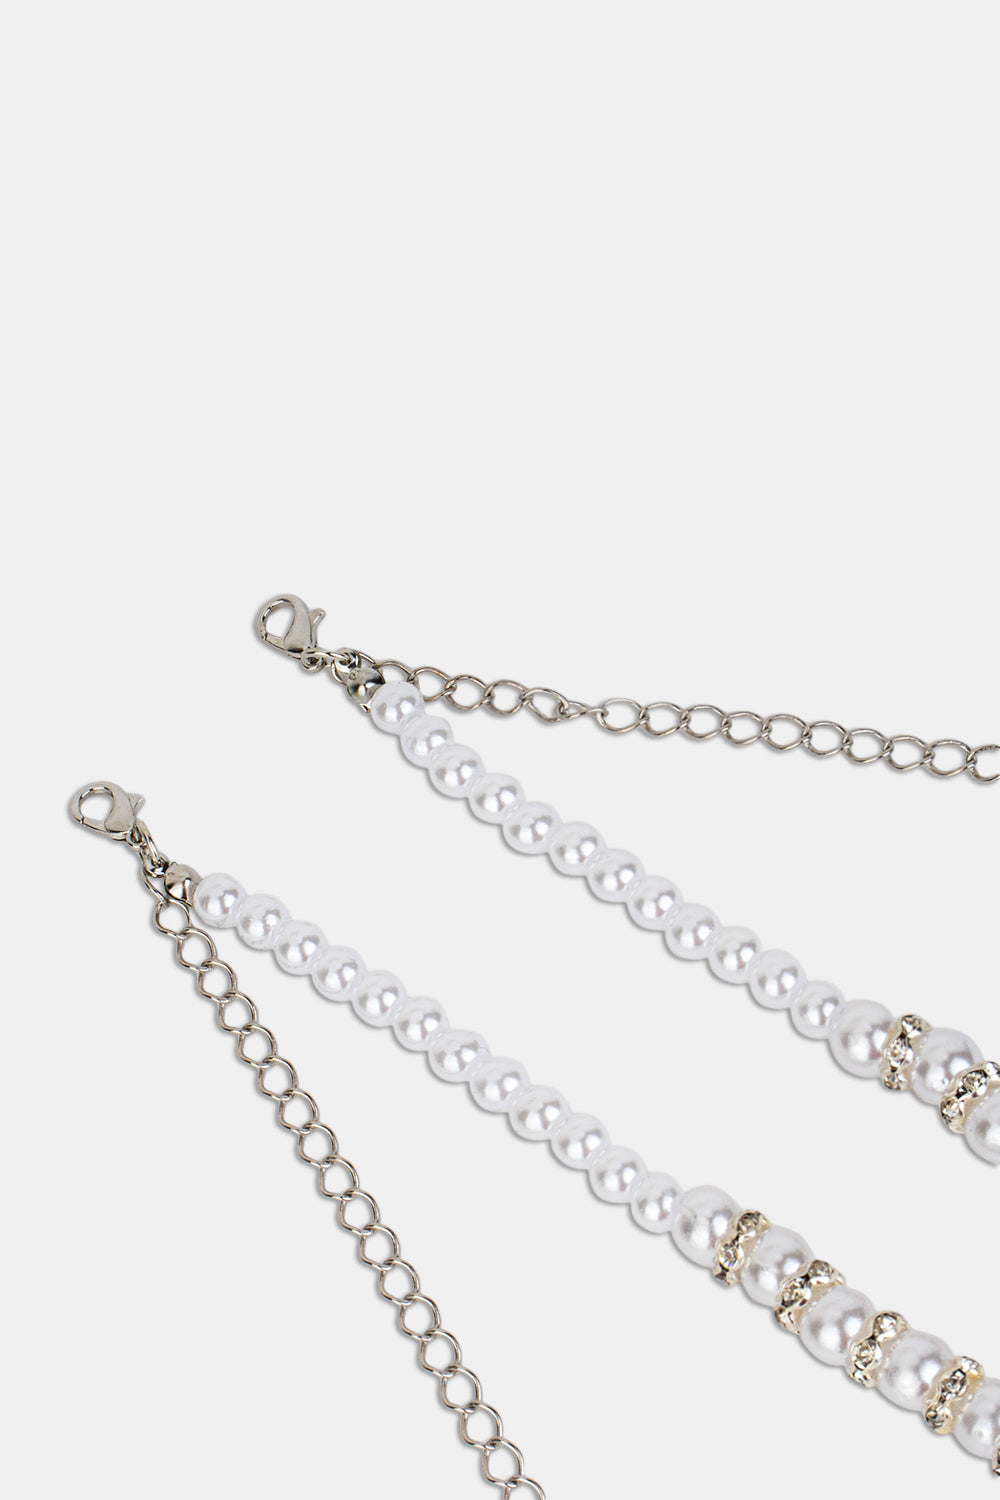 Intimacy Crystal Metal Detachable Strap with Elegant Pearls